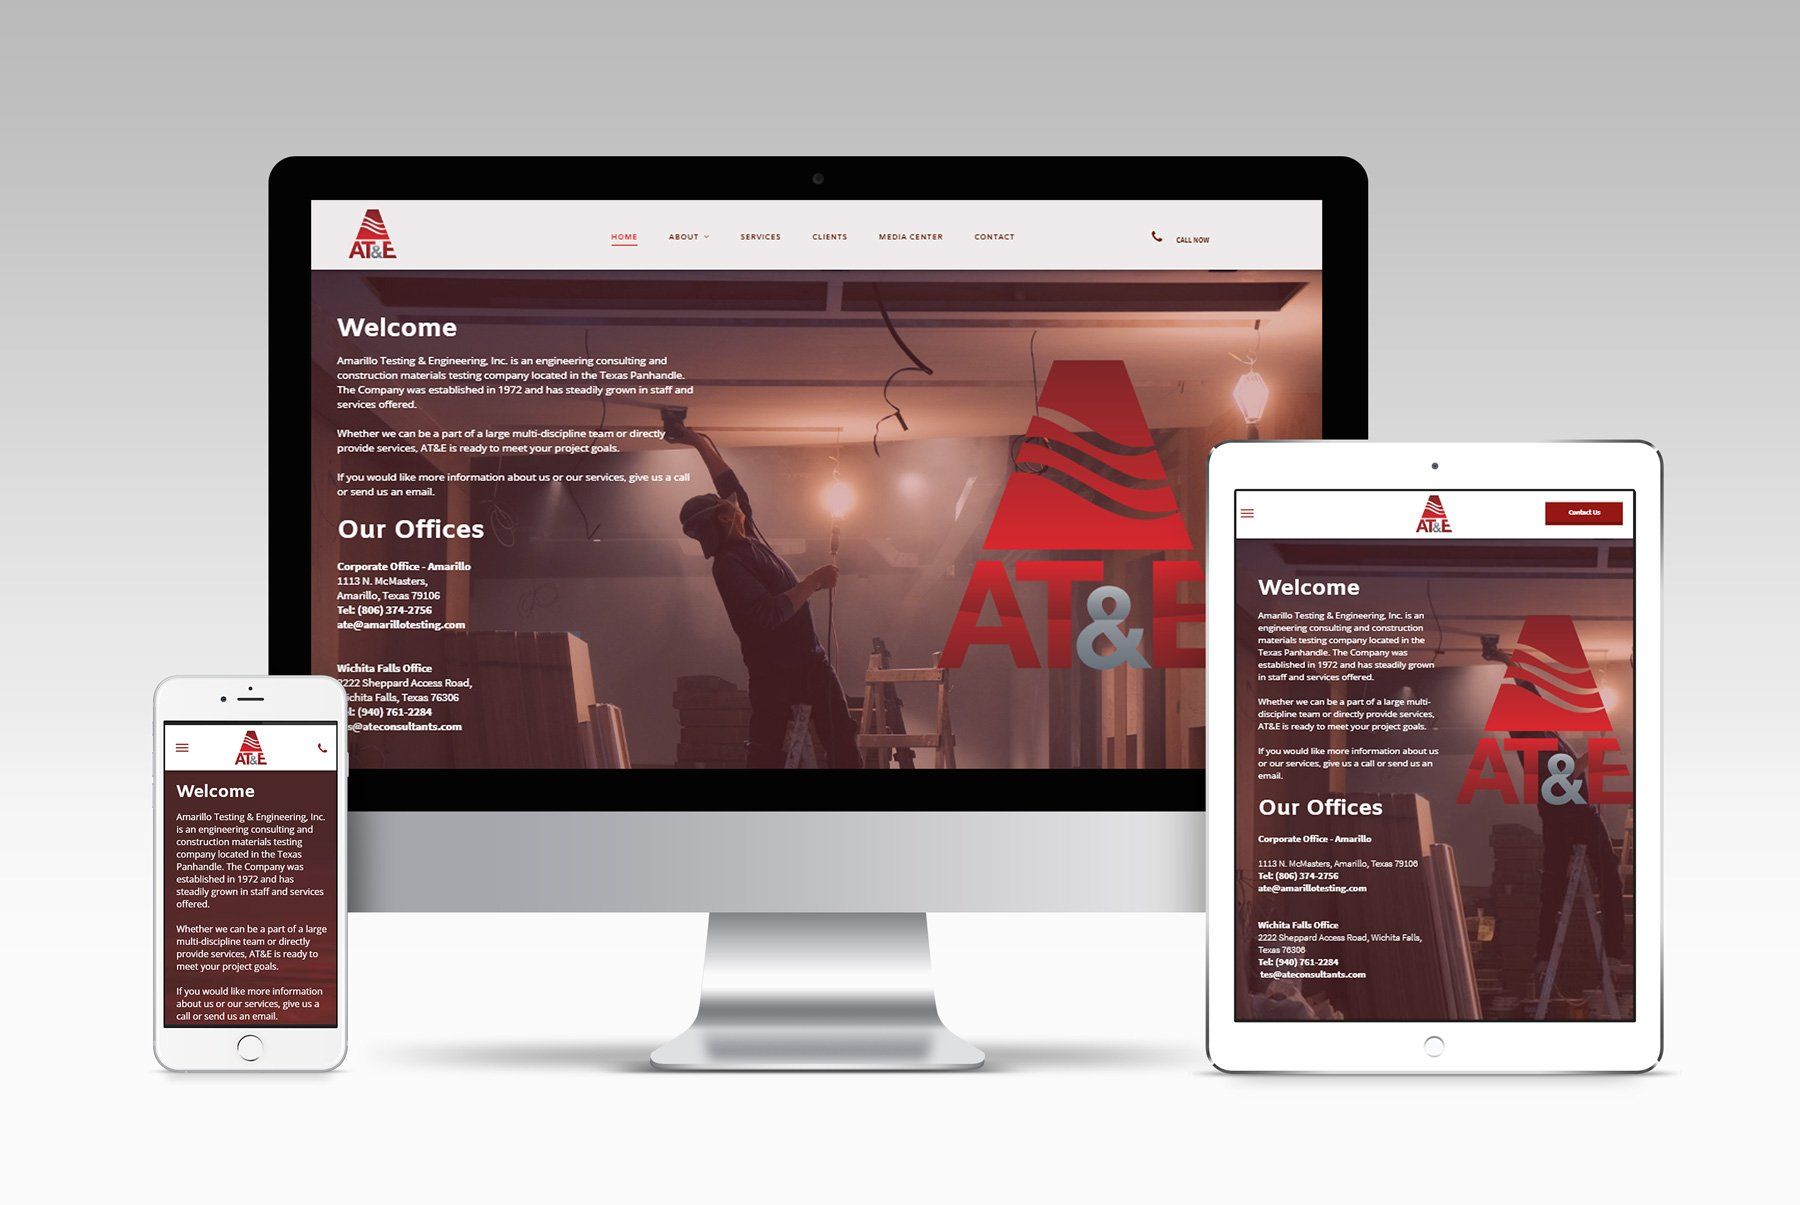 Amarillo Testing and Engineering website design by C&B Marketing